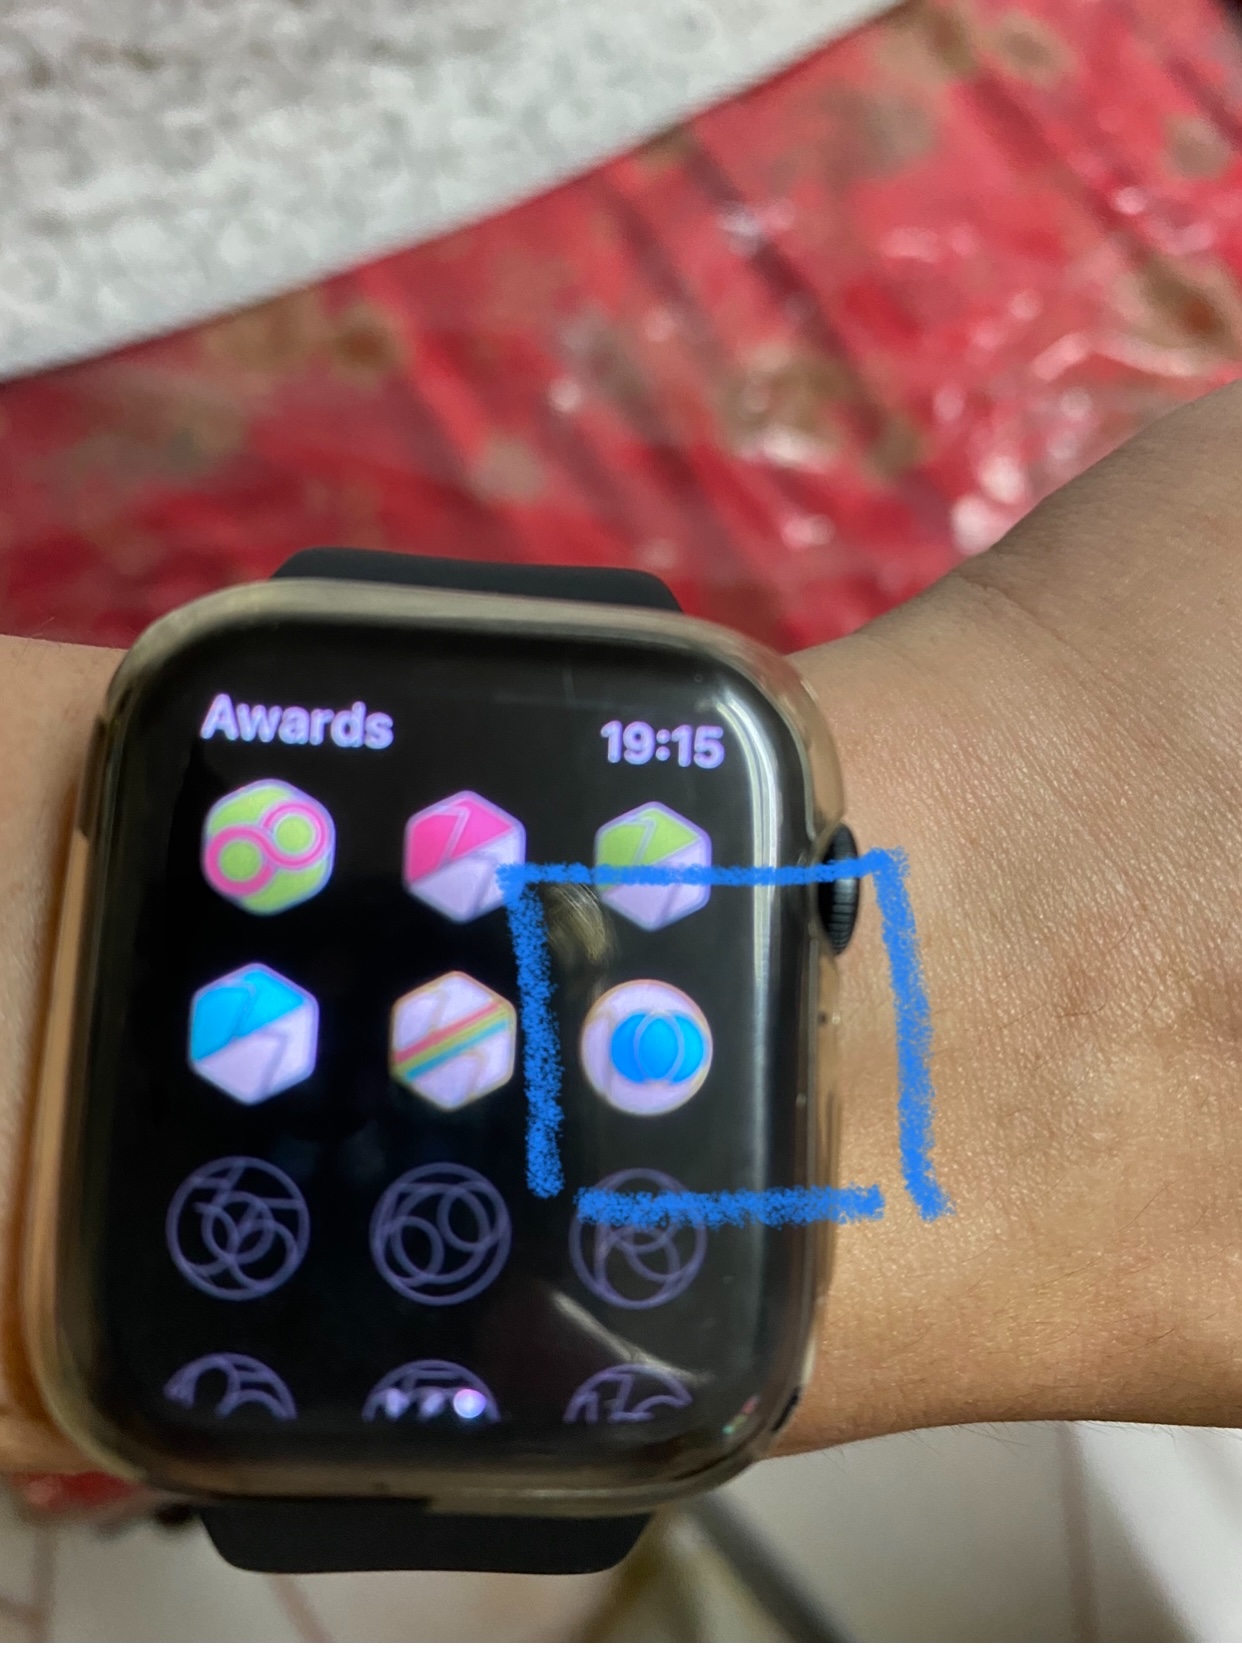 Apple watch badges not in sync with iPhon… - Apple Community